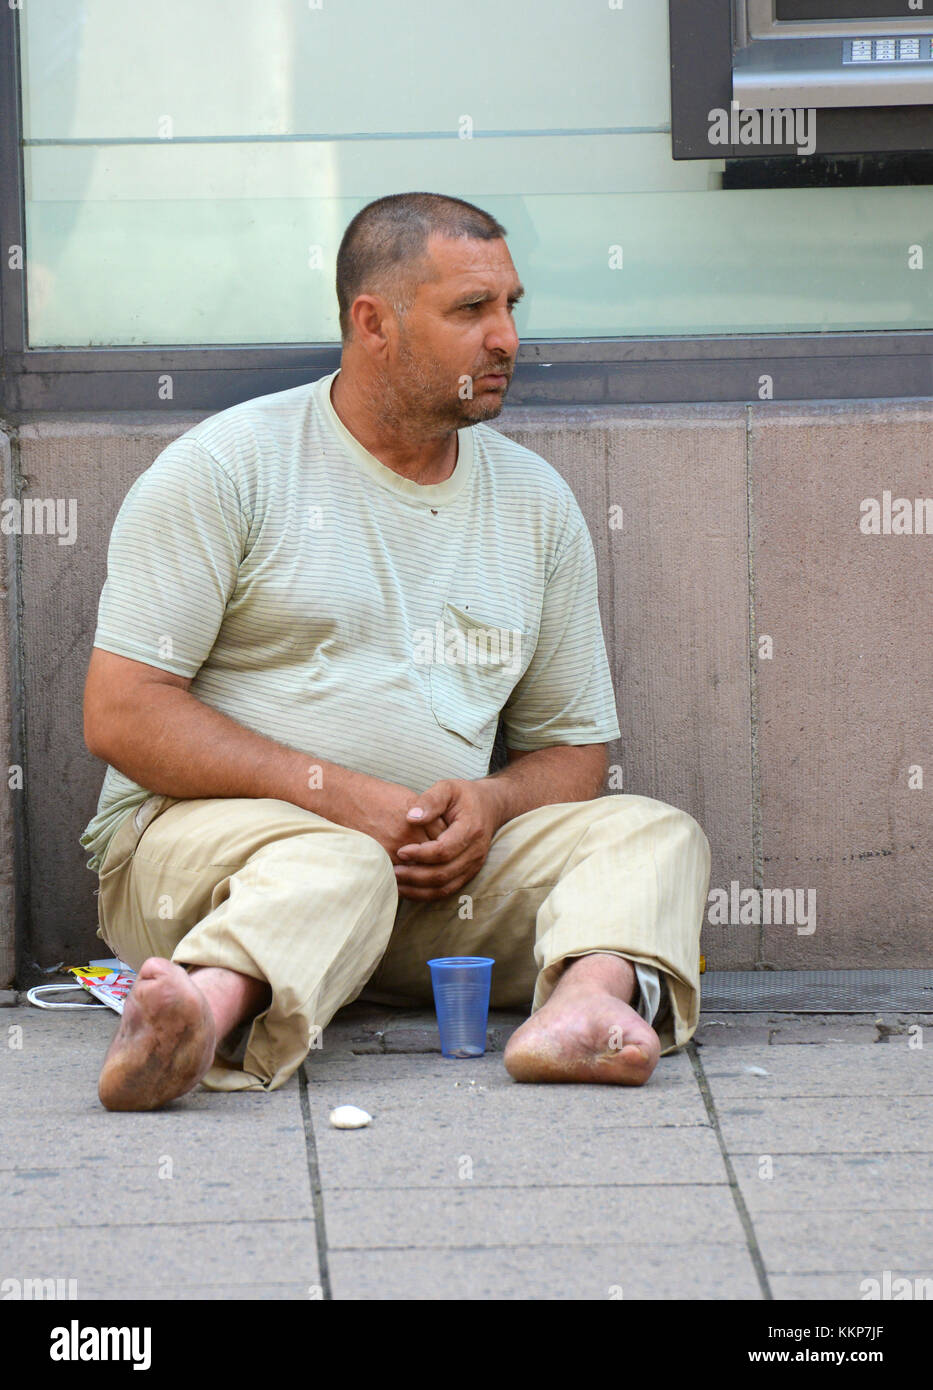 Strasbourg, France - July 7, 2012: a disabled person asks for money near the ATM. Editorial only. Stock Photo